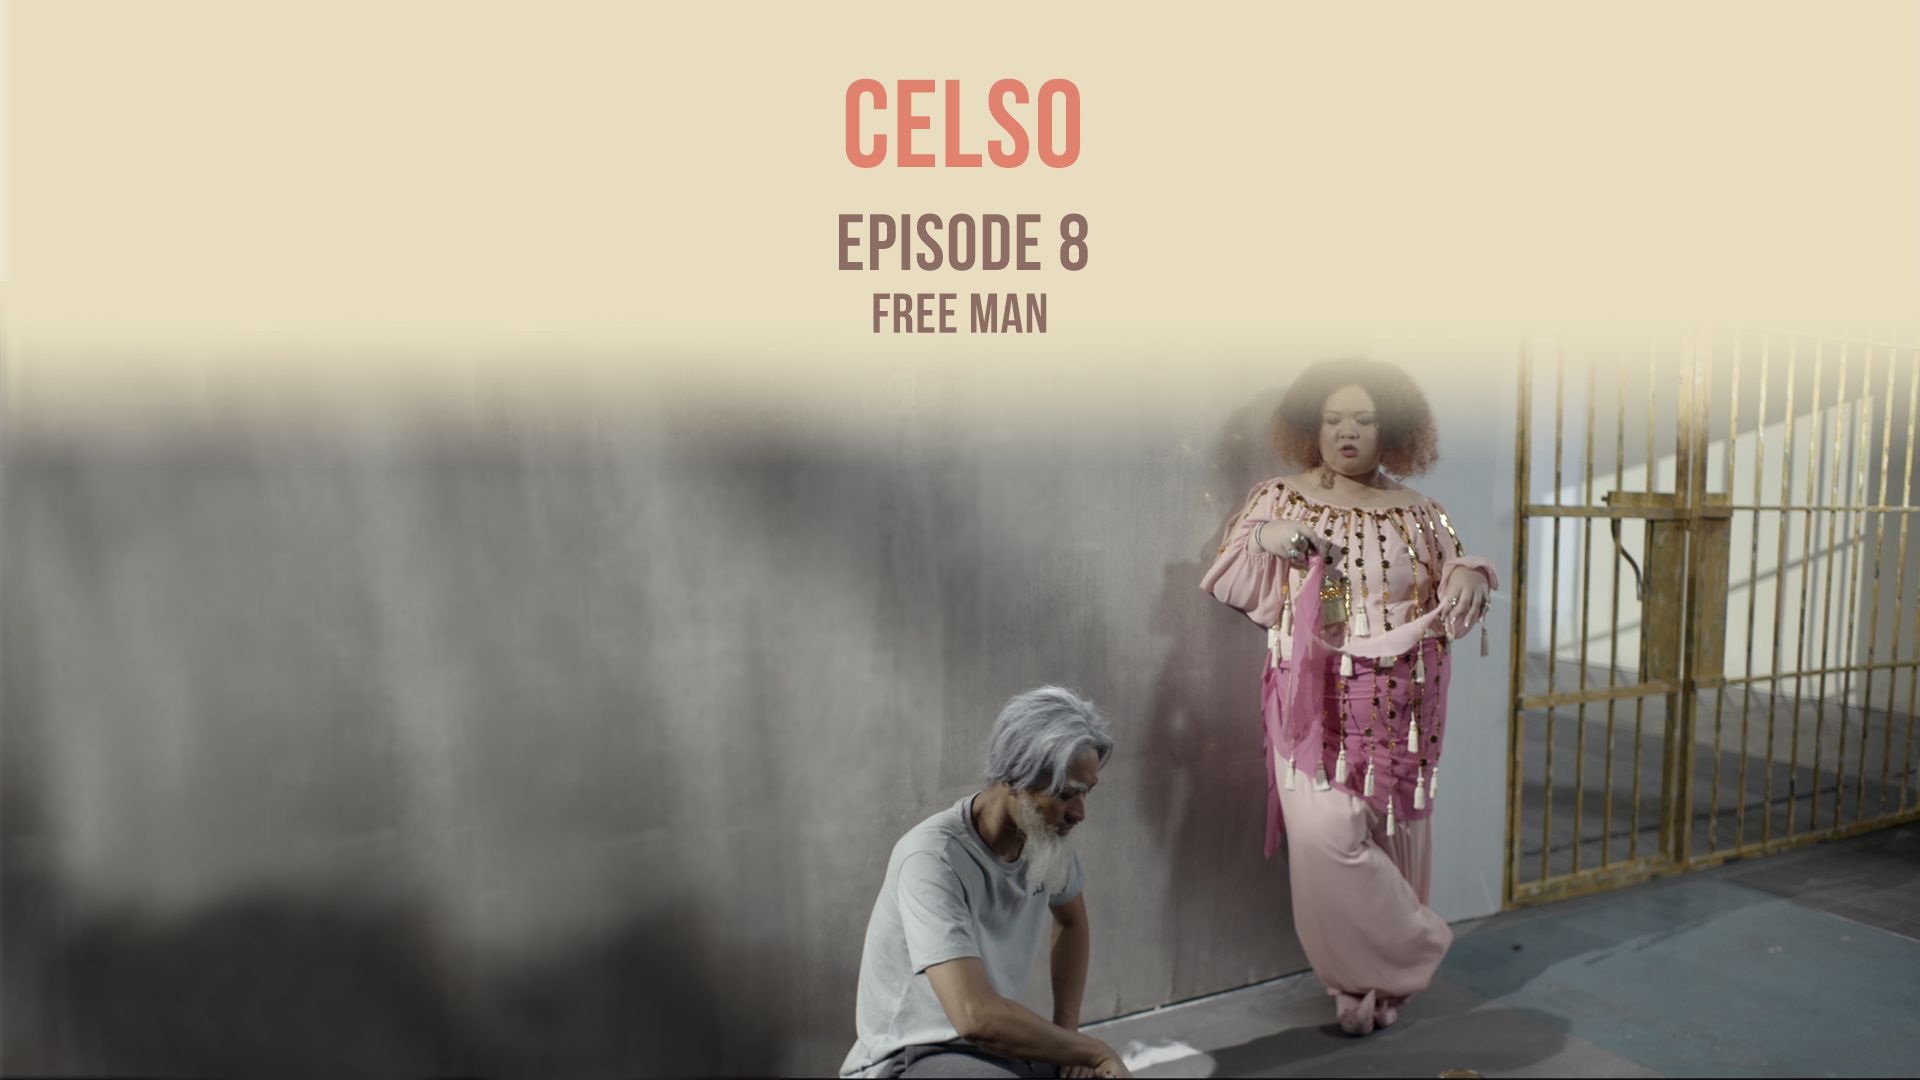 CELSO Episode 8